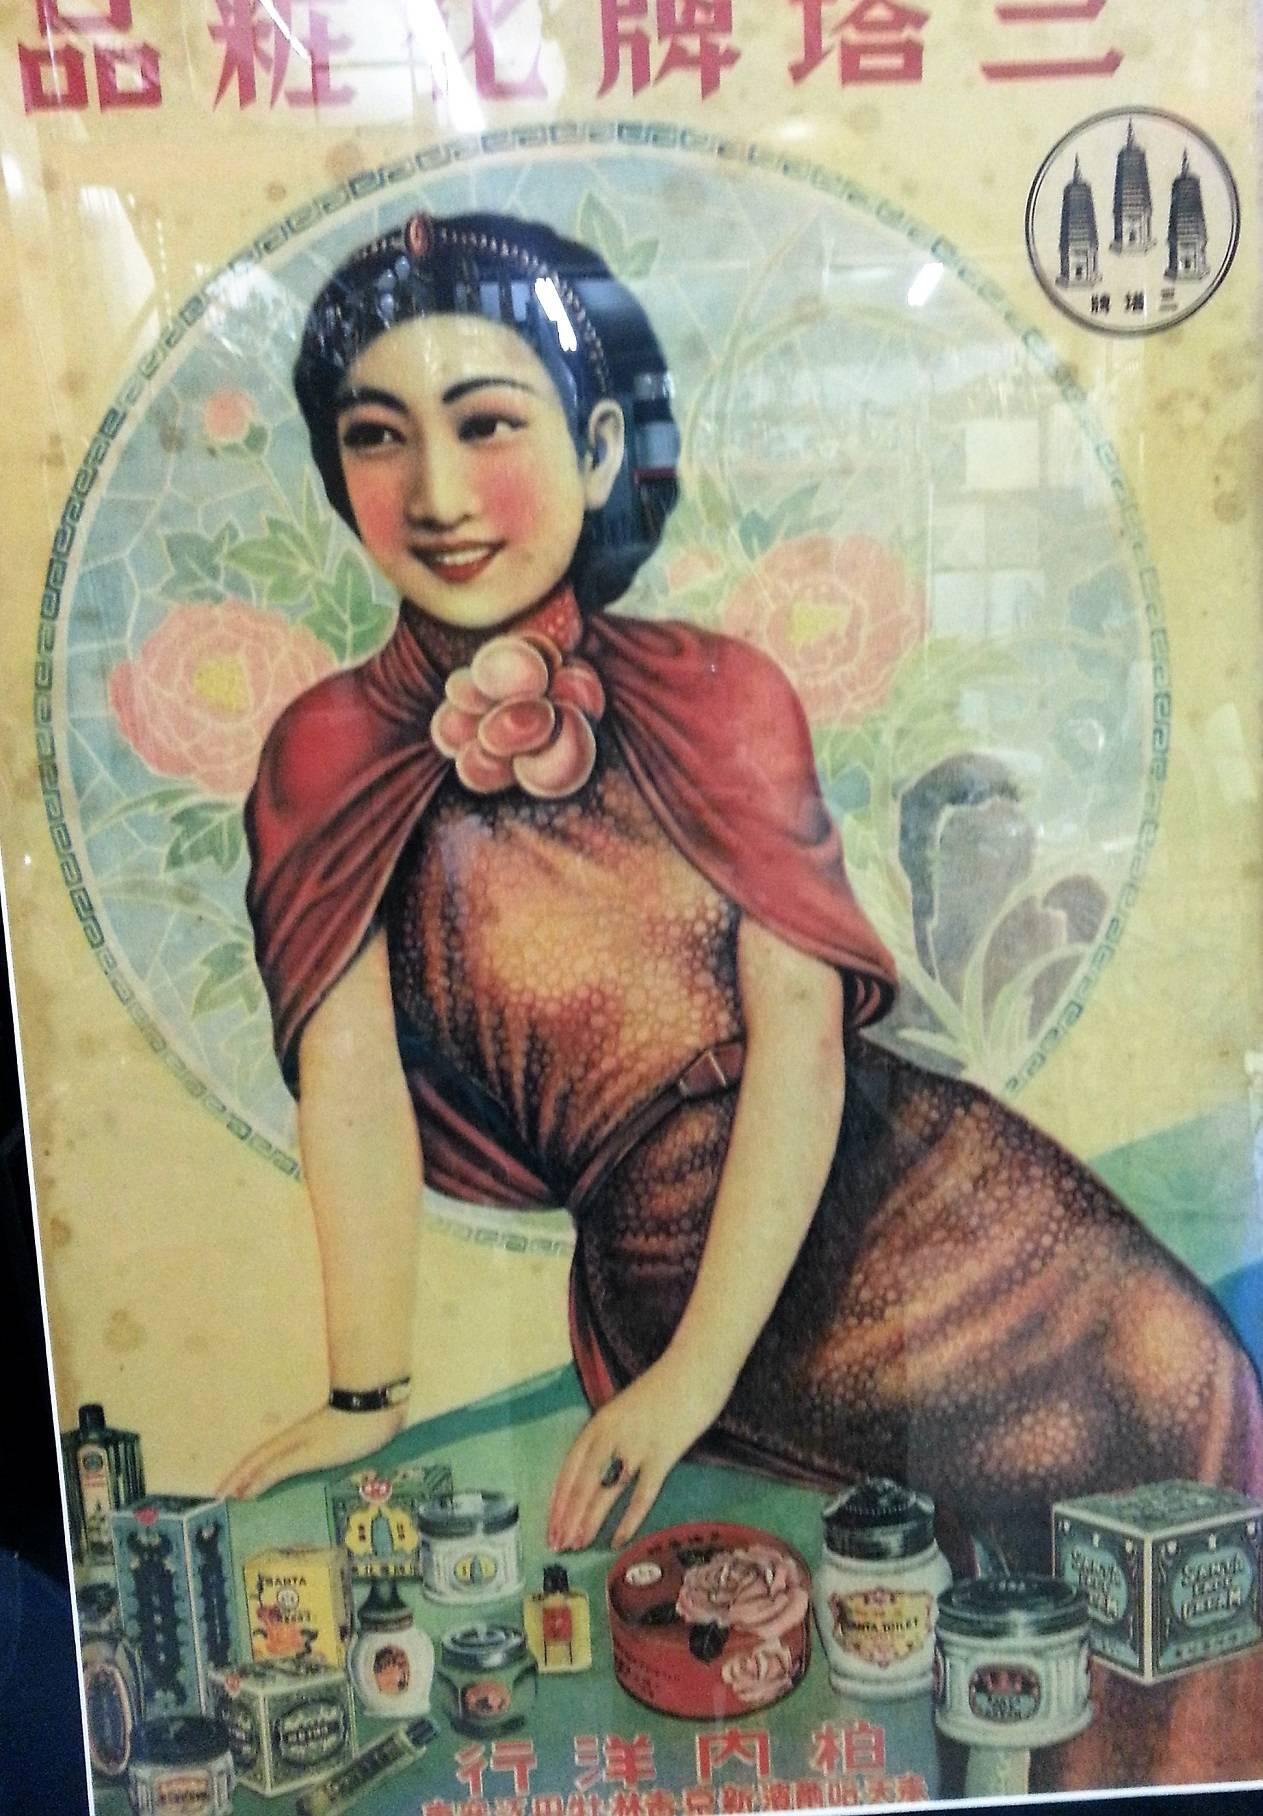 Gorgeous advertisement of a Chinese girl showing how beautiful a woman may look if they use the lotions and powders presented in the poster. Details of products and crispness add to print. Poster measures 29.5 H x 19.5 W, wood frame.